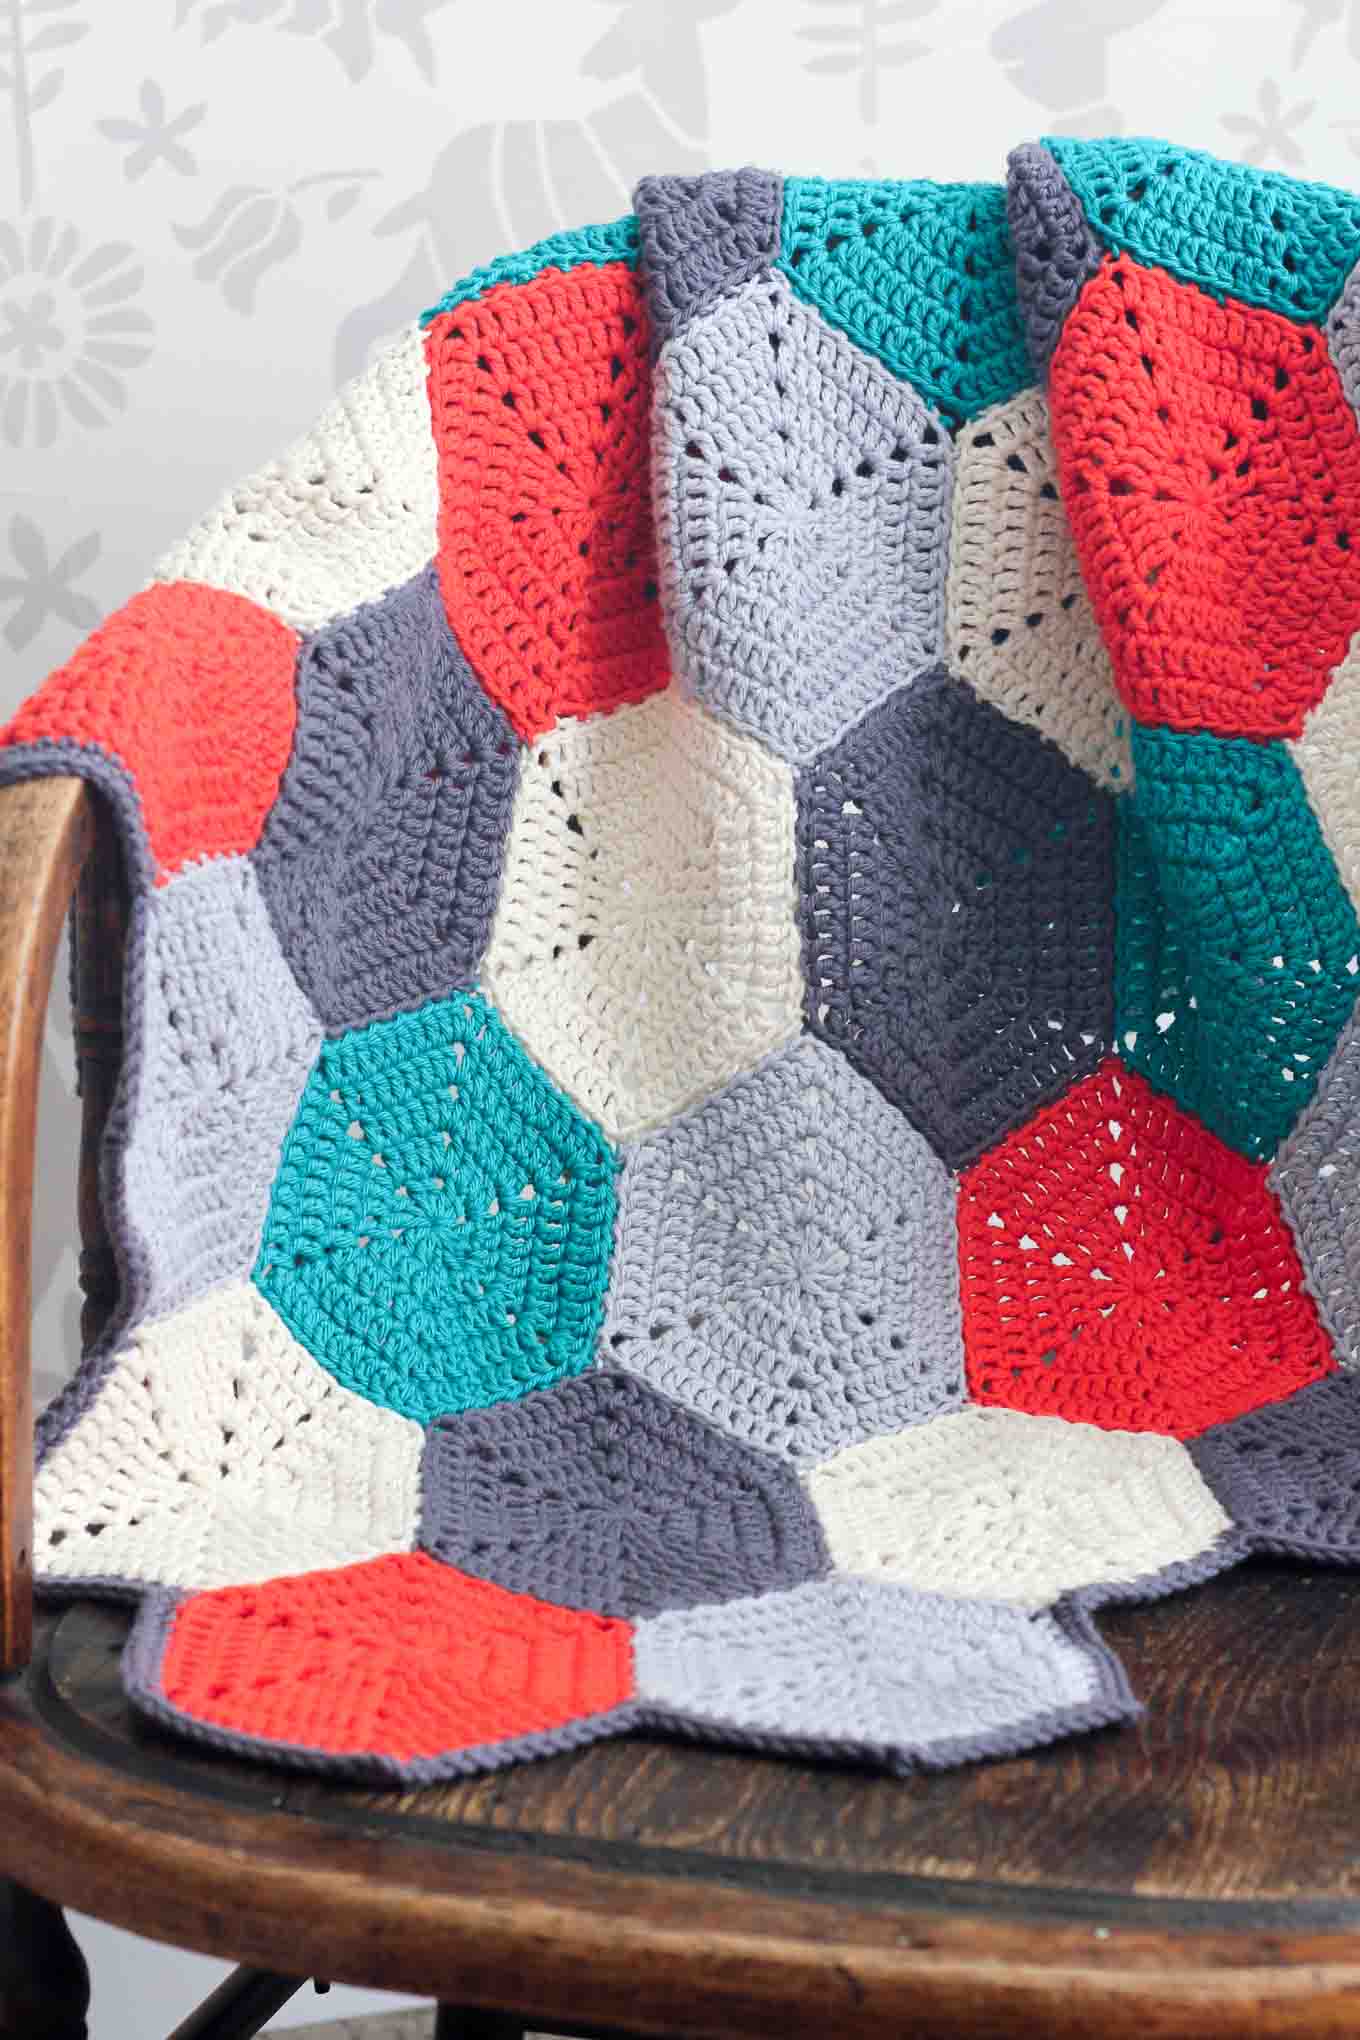 This free crochet afghan pattern is customizable, so you can use it to make a baby blanket, lap blanket or even a bedspread. Makes a great modern, gender-neutral baby shower gift idea or an afghan for the couch. Click for the free pattern and photo tutorial. | MakeAndDoCrew.com